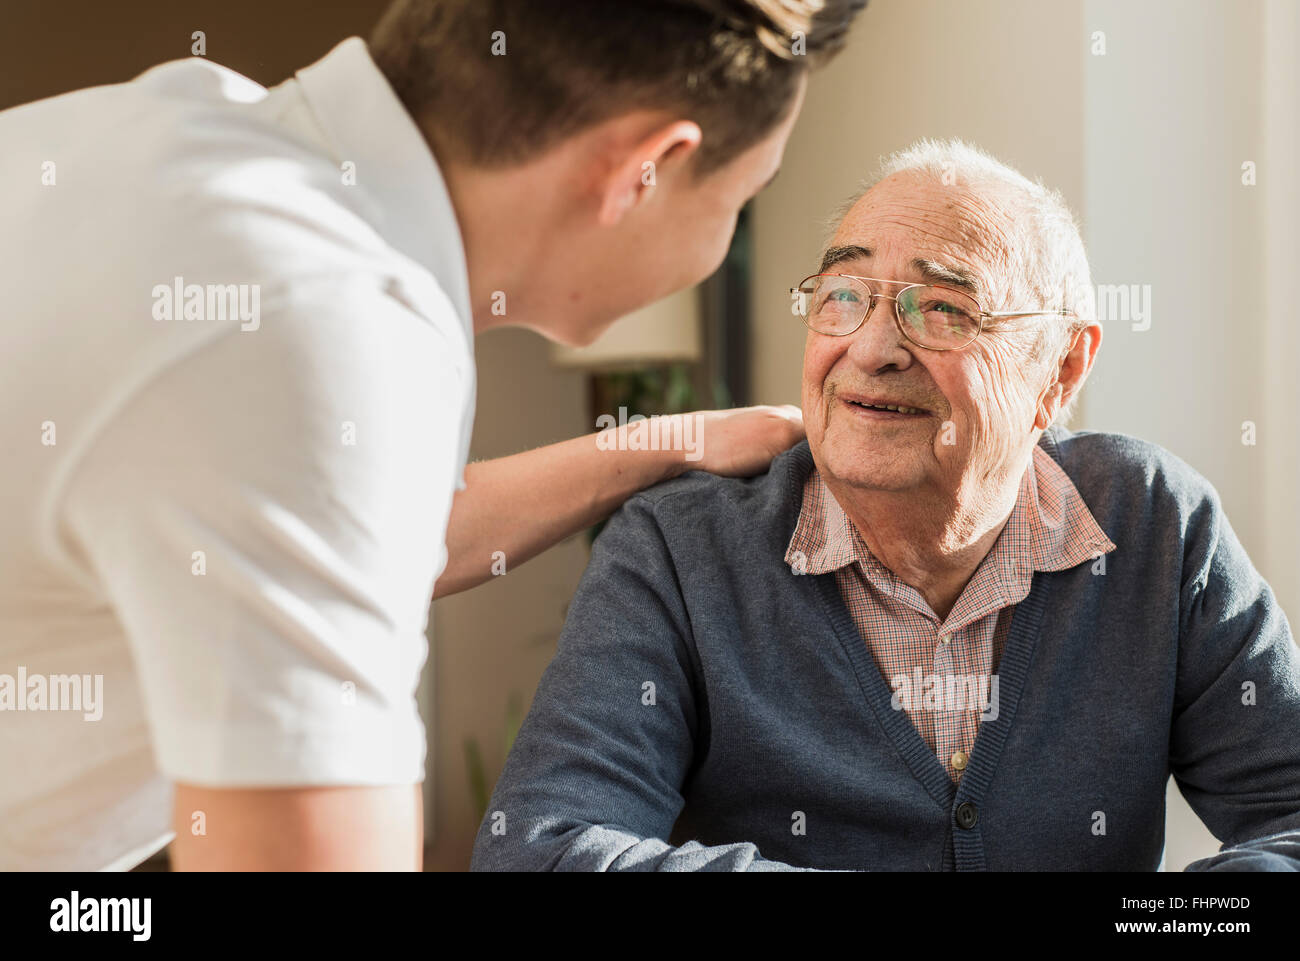 Portrait of smiling senior man face to face with his geriatric nurse Stock Photo